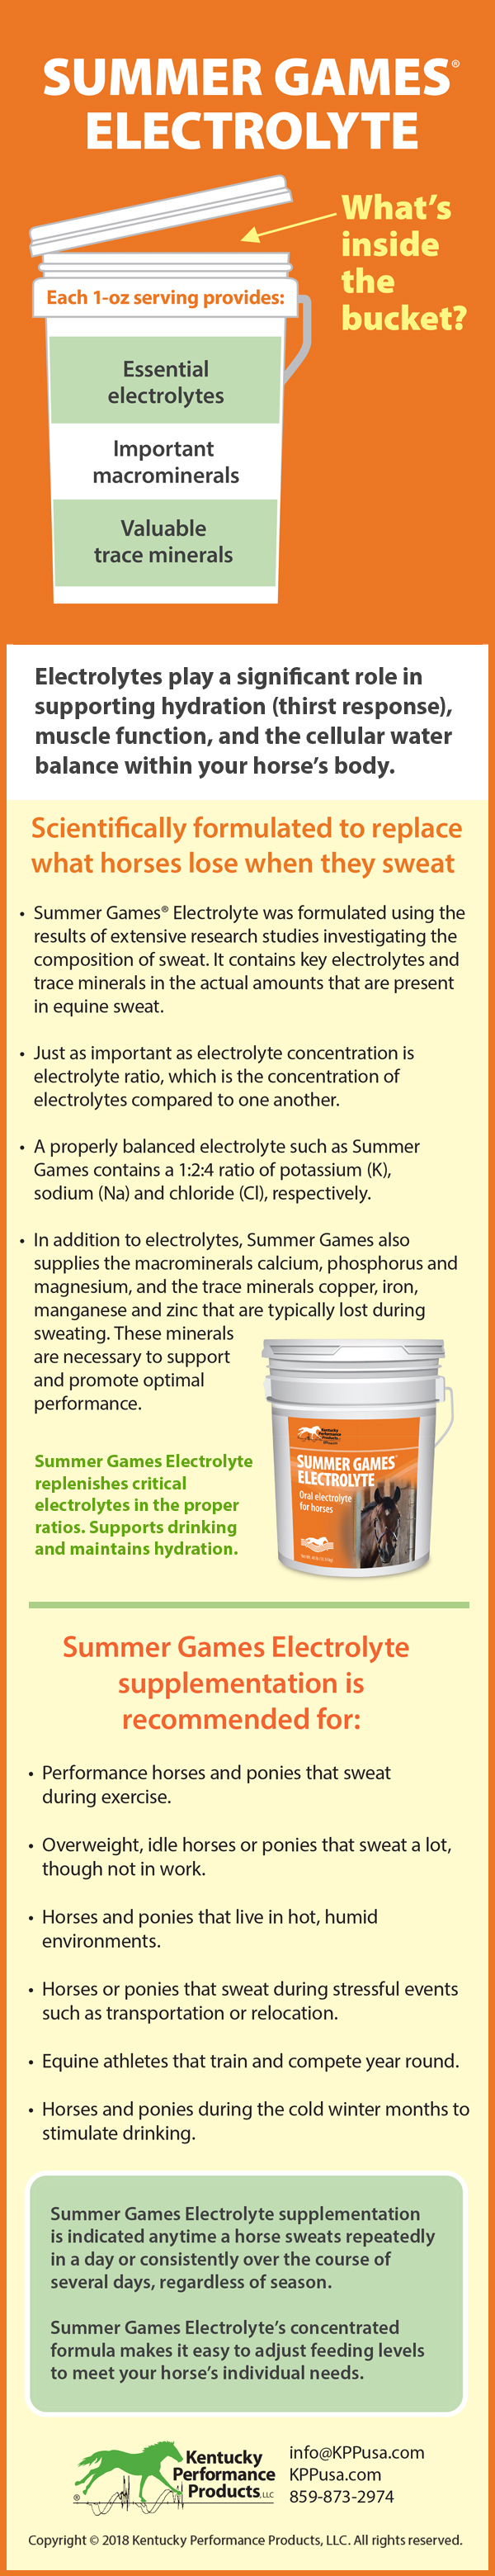 Summer-Games-Electrolyte-Whats-Inside-the-Bucket-18-173